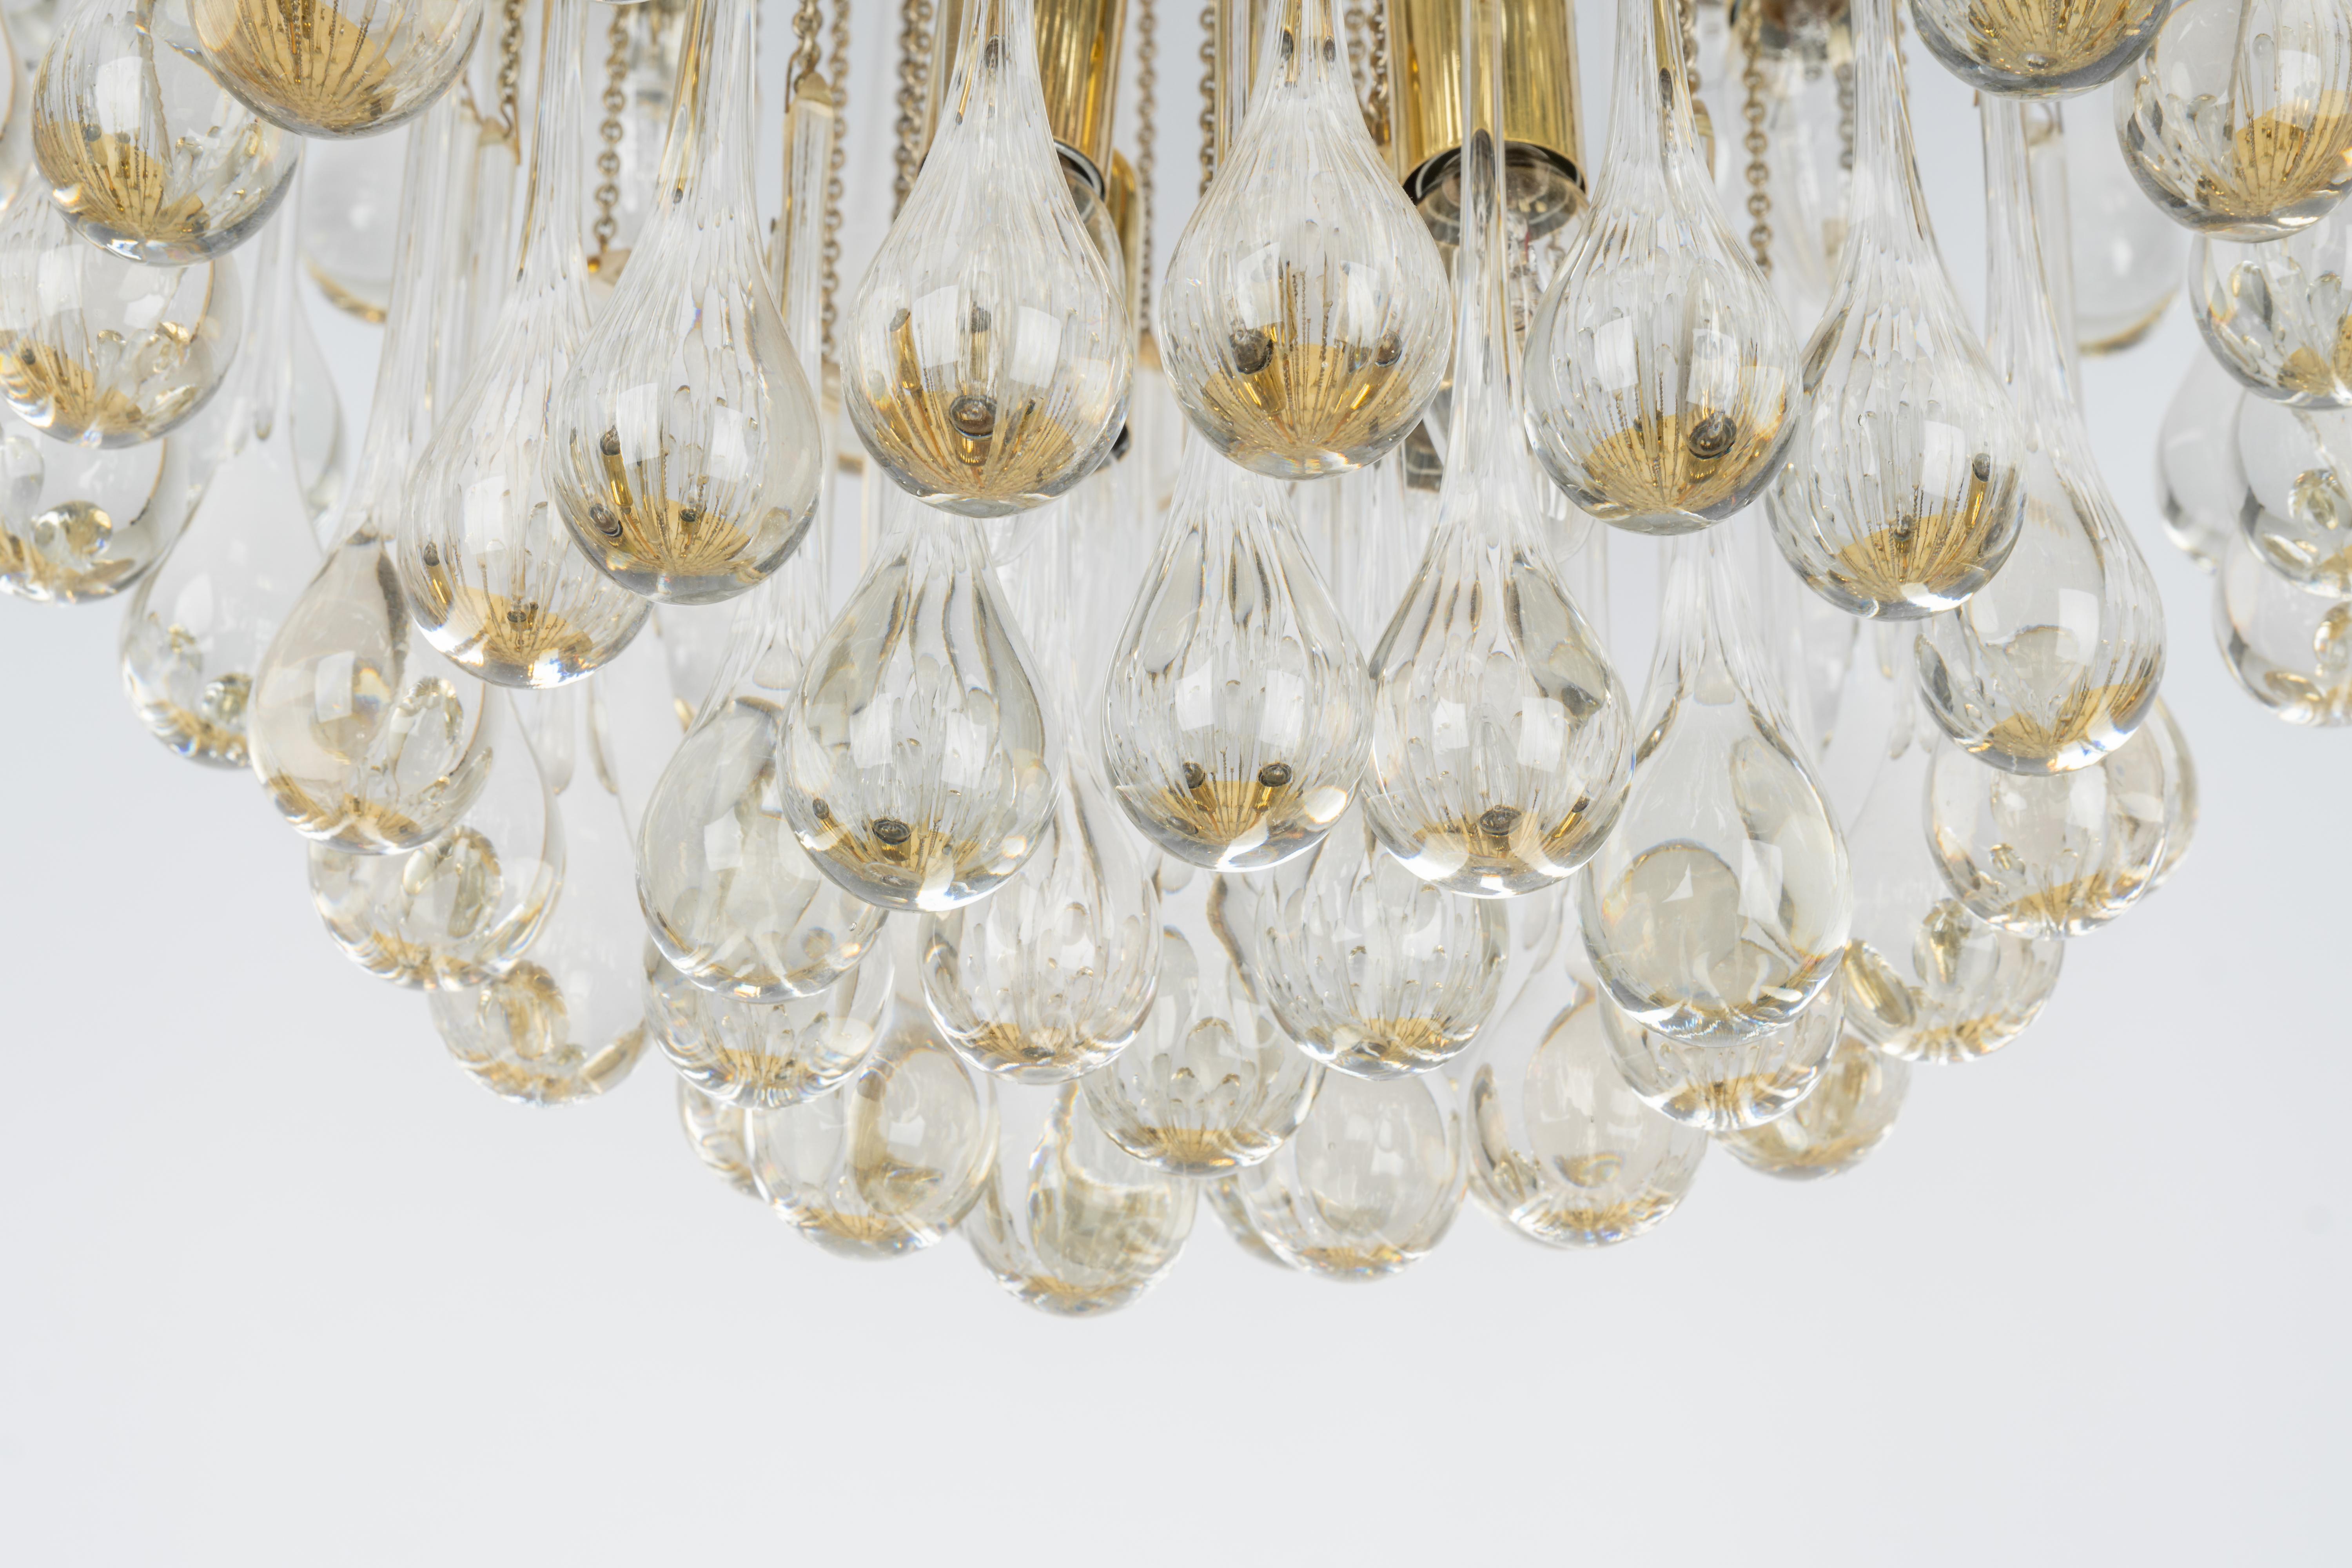 Brass 1 of 3 Large Murano Glass Tear Drop Chandelier, Christoph Palme, Germany, 1970s For Sale